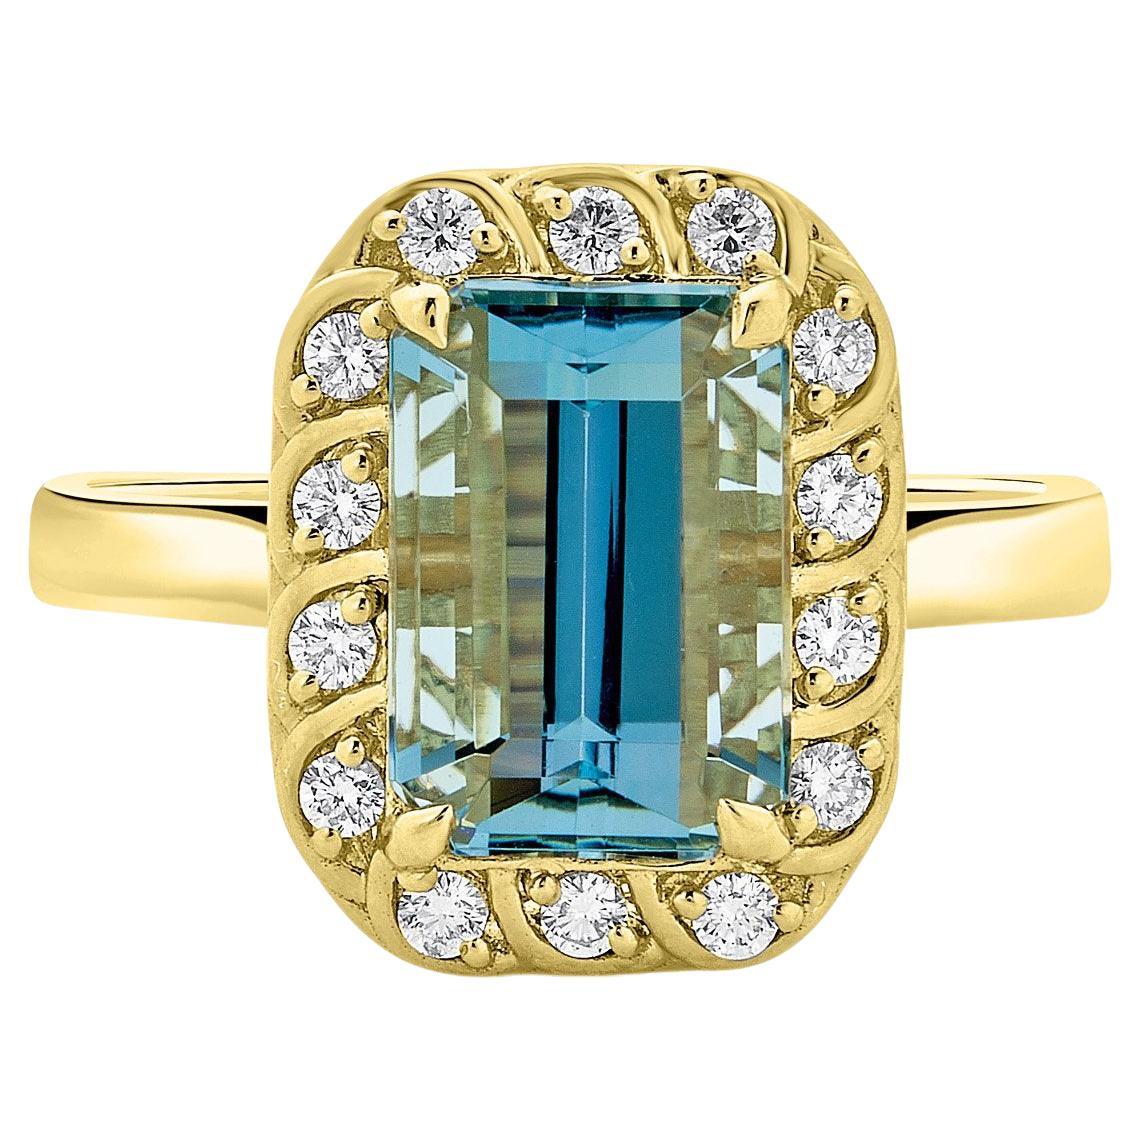 3.03ct Aquamarine Ring with 0.23tct Diamonds Set in 14k Yellow Gold For Sale